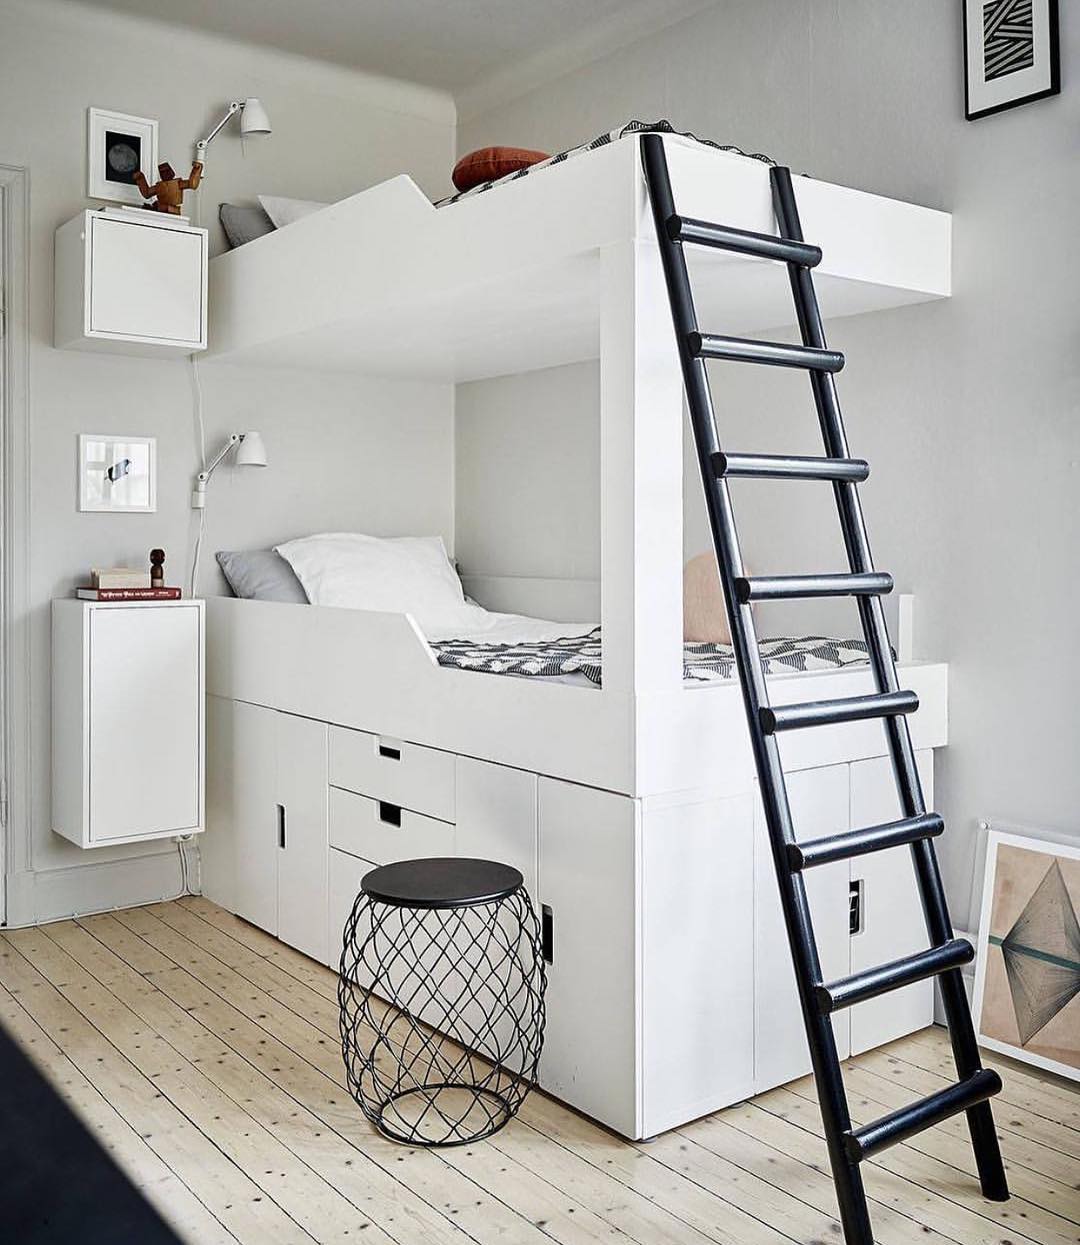 Ideas For Designing Shared Kids Rooms, Boy And Girl Shared Room Ideas Bunk Bed